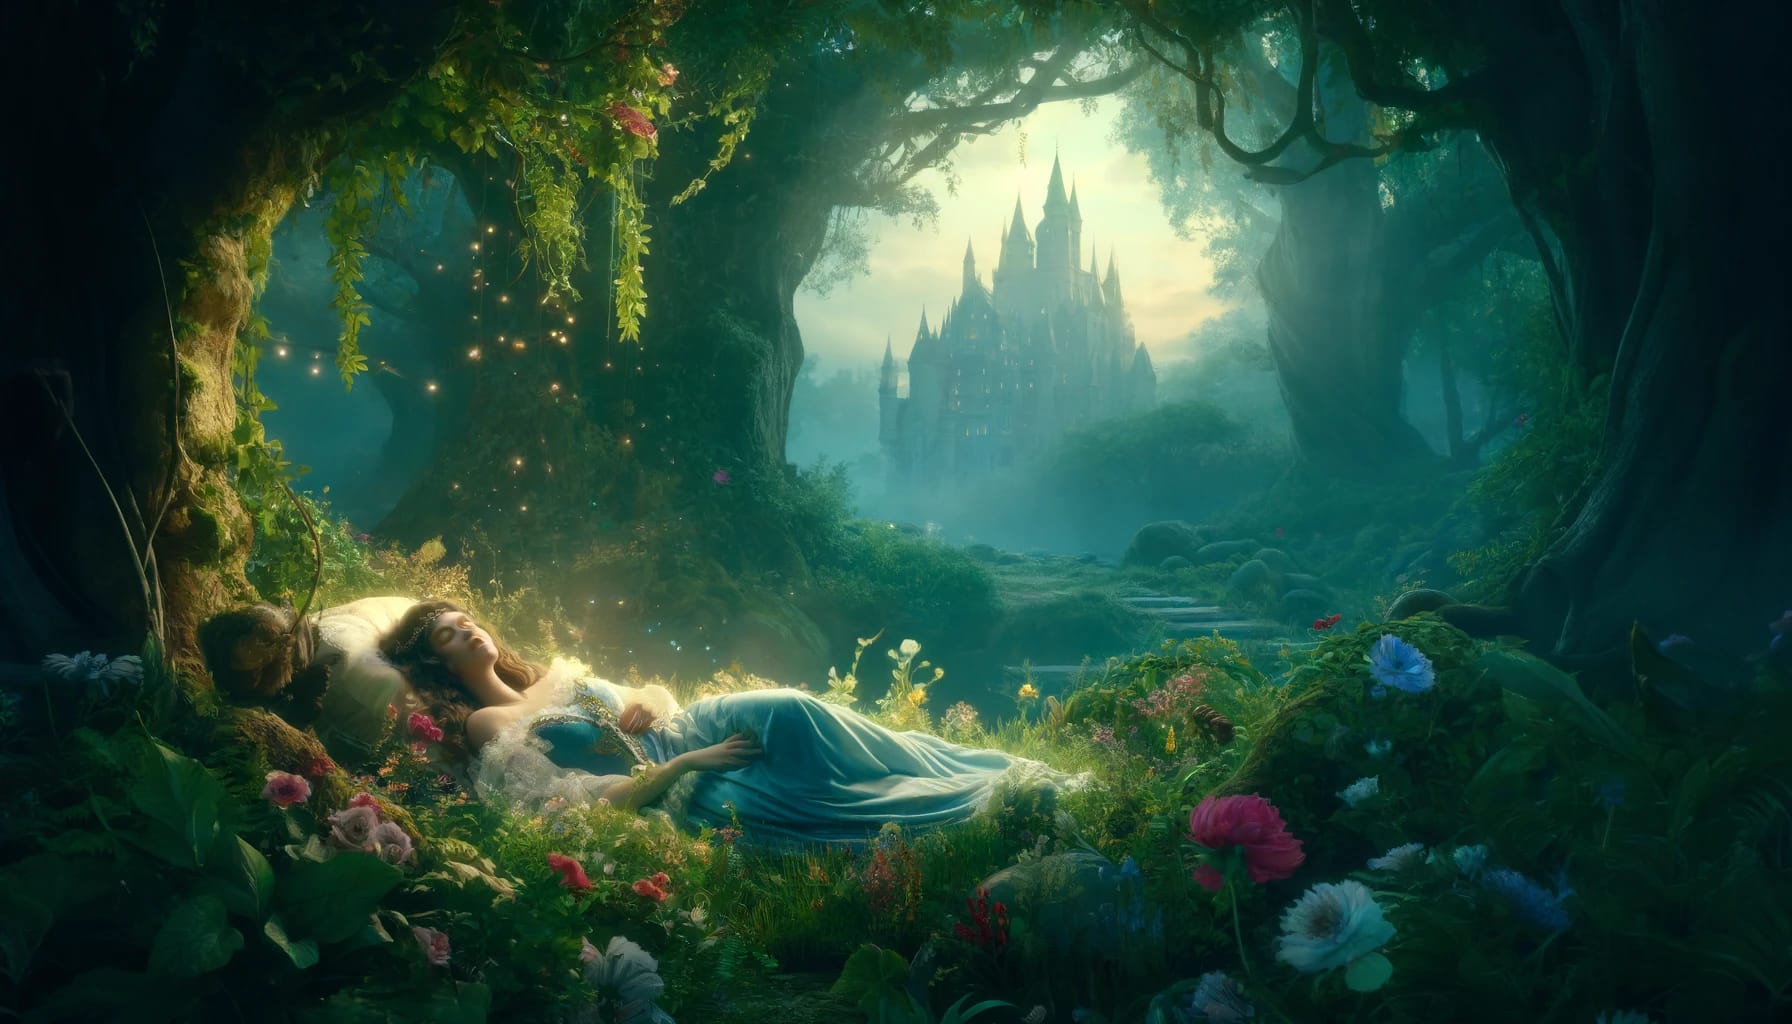 Podcast #48 Why The Story Of Sleeping Beauty Is So Important For Self Growth